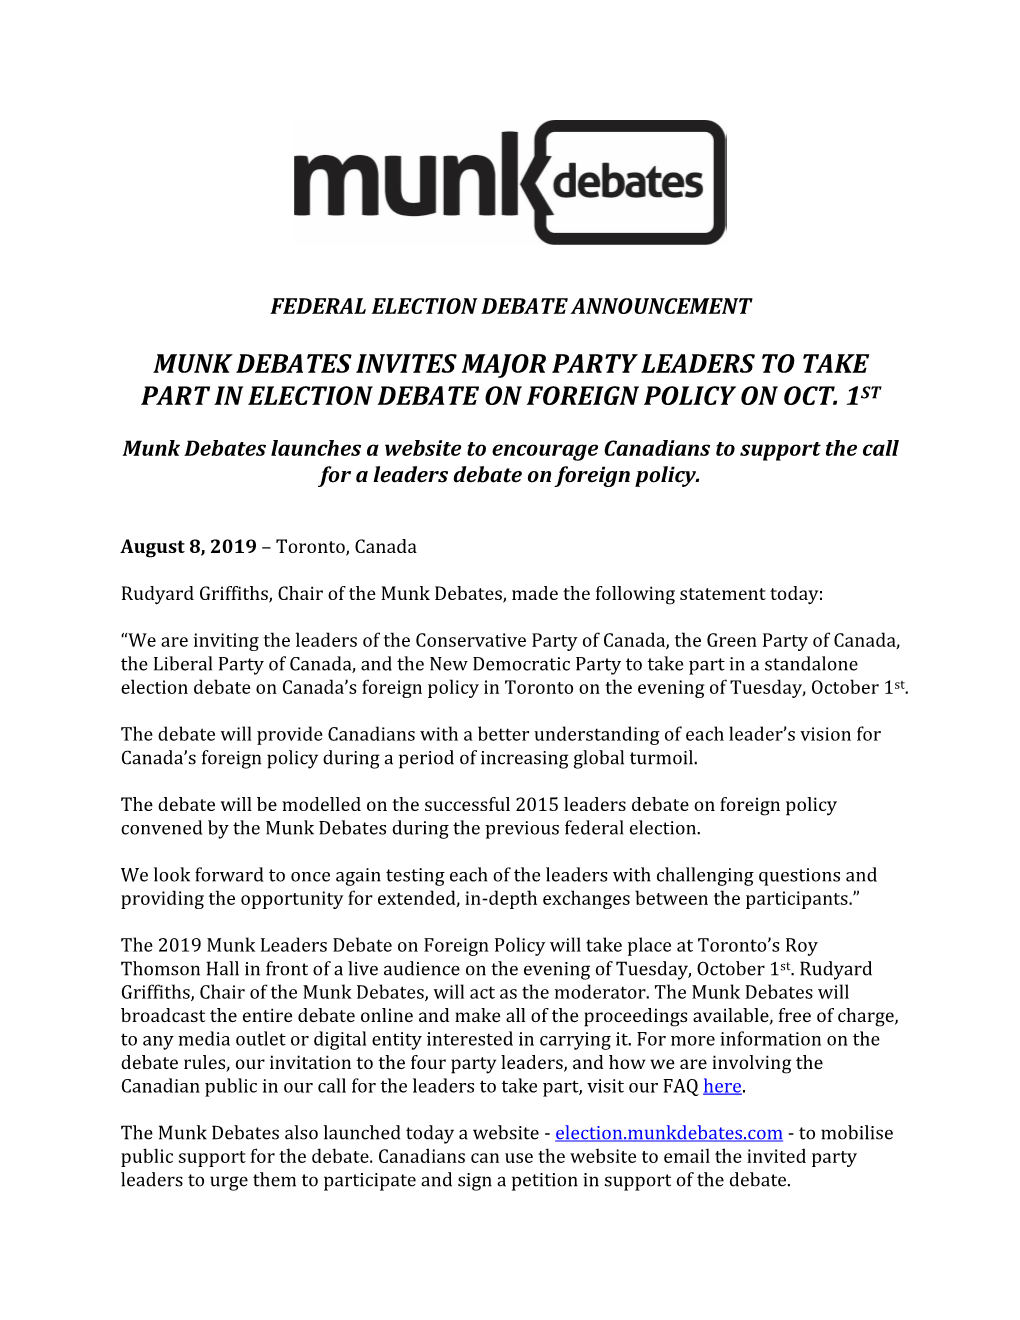 Munk Debates Invites Major Party Leaders to Take Part in Election Debate on Foreign Policy on Oct